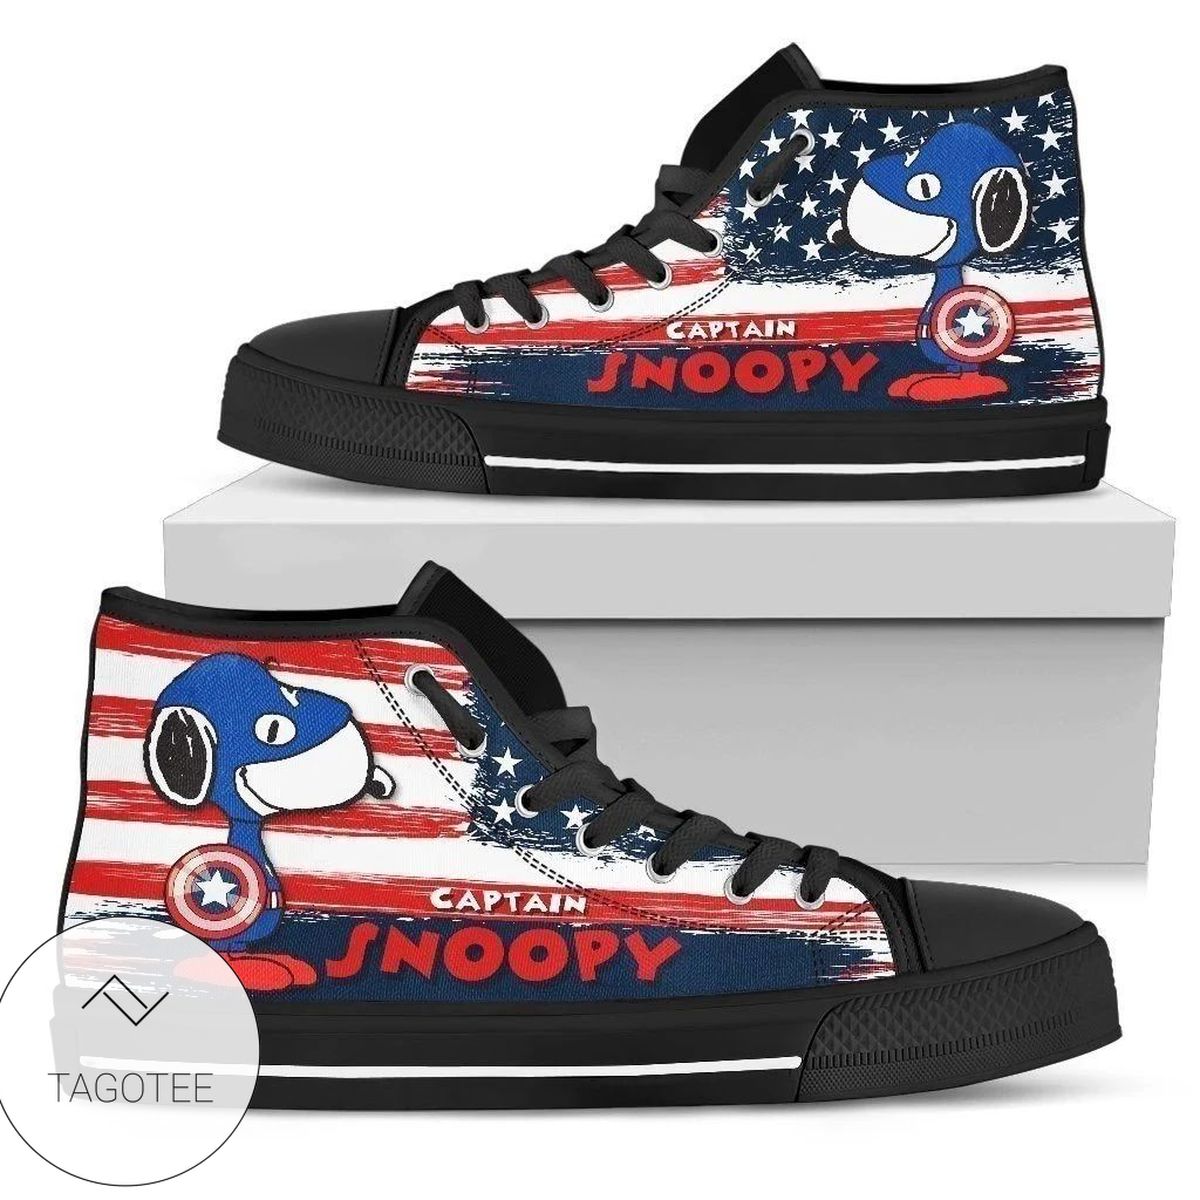 Captain Snoopy Sneakers High Top Shoes American Flag High Top Shoes